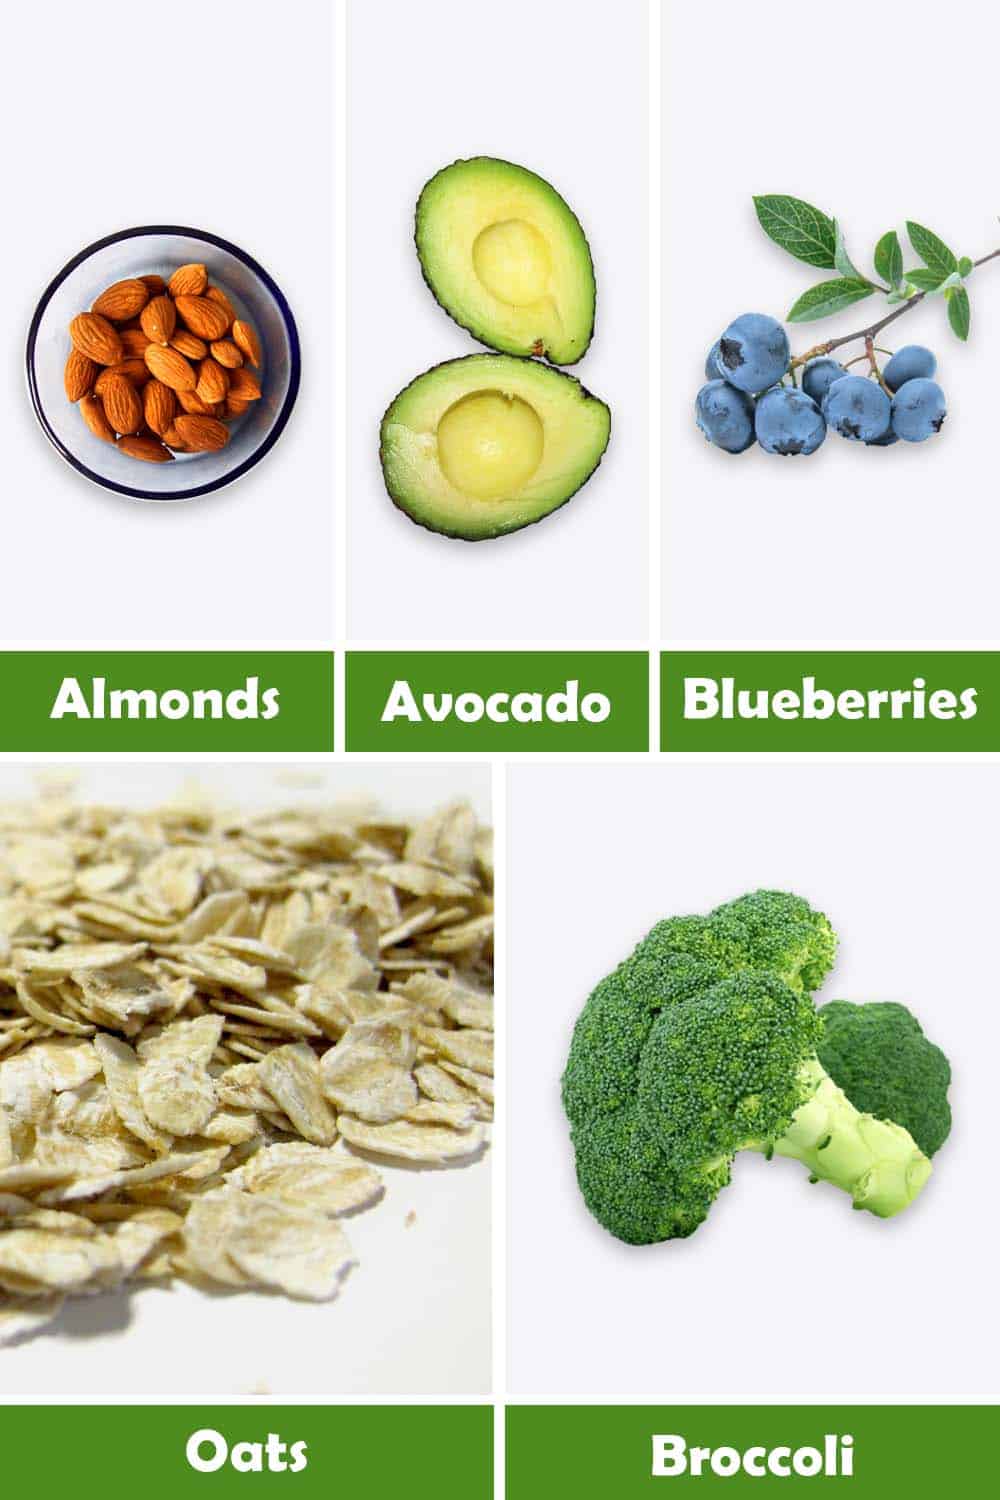 ALMONDS, AVOCADO, BLUEBERRIES, OATS AND BROCCOLI